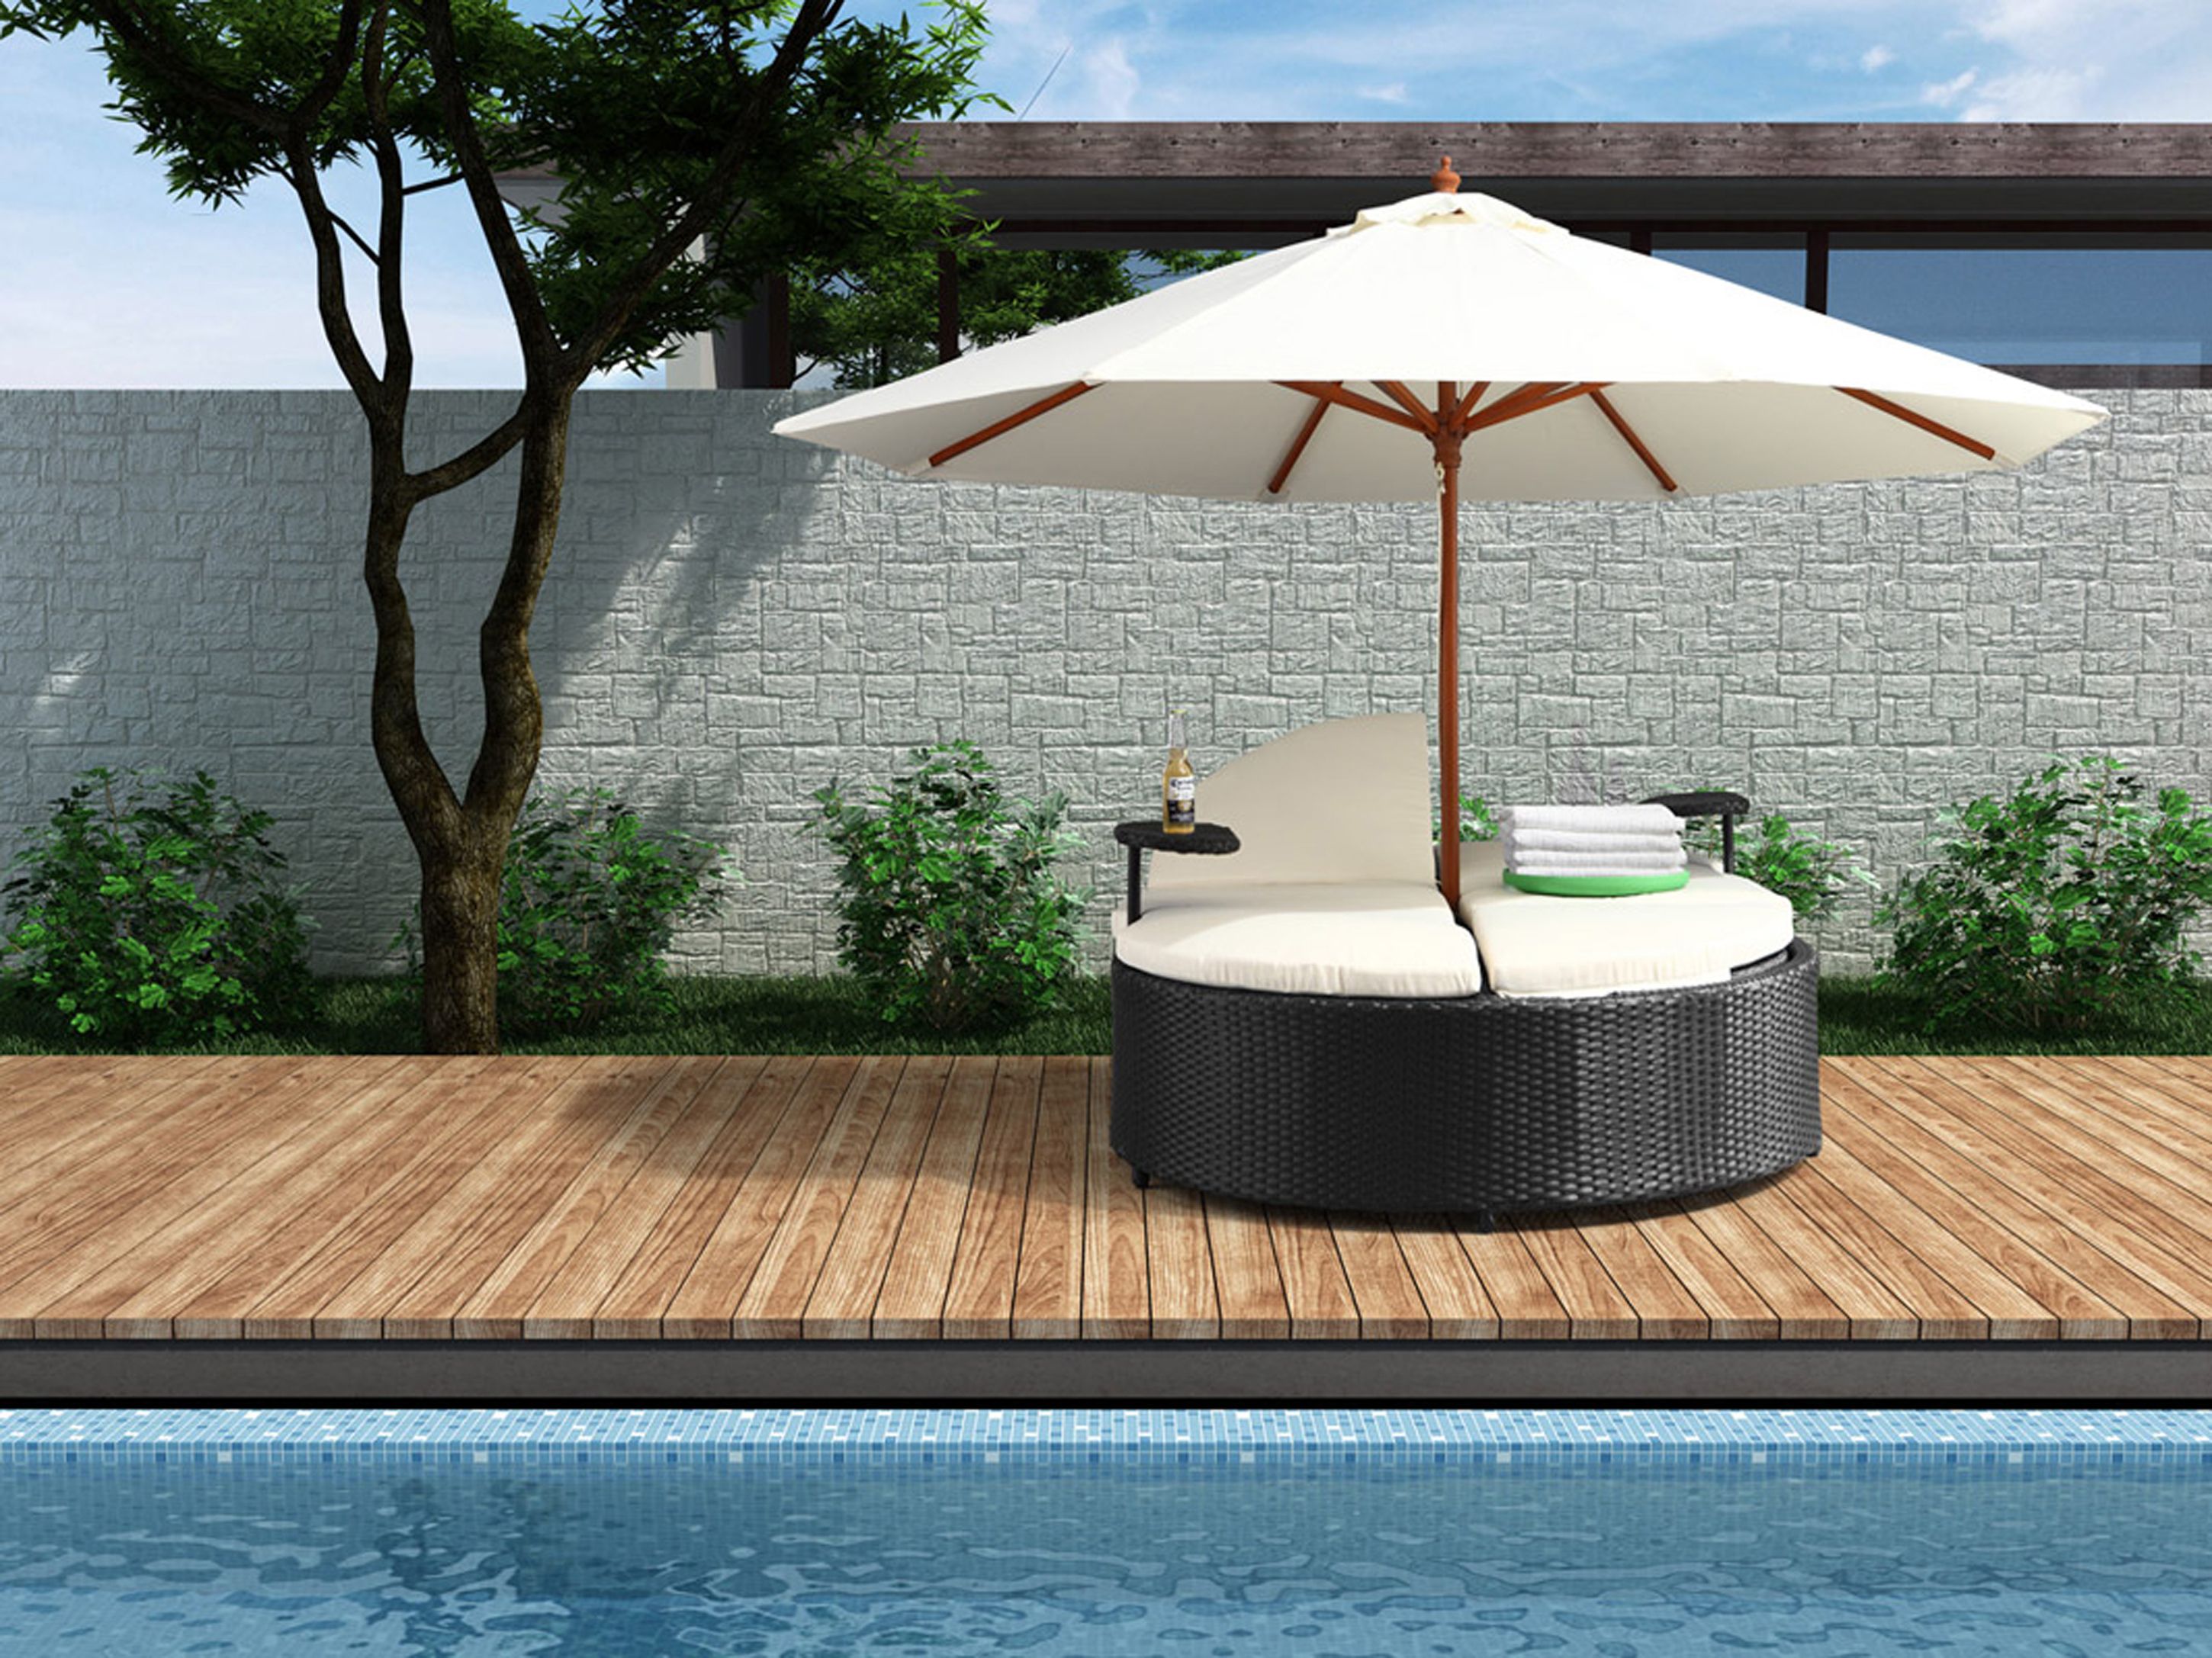 Romantic Zuo Modern Outdoor Design Idea With Round Black Lounge Chair With White Seat Cushion And White Umbrella Interesting Zuo Modern Outdoor Design Ideas (View 8 of 39)